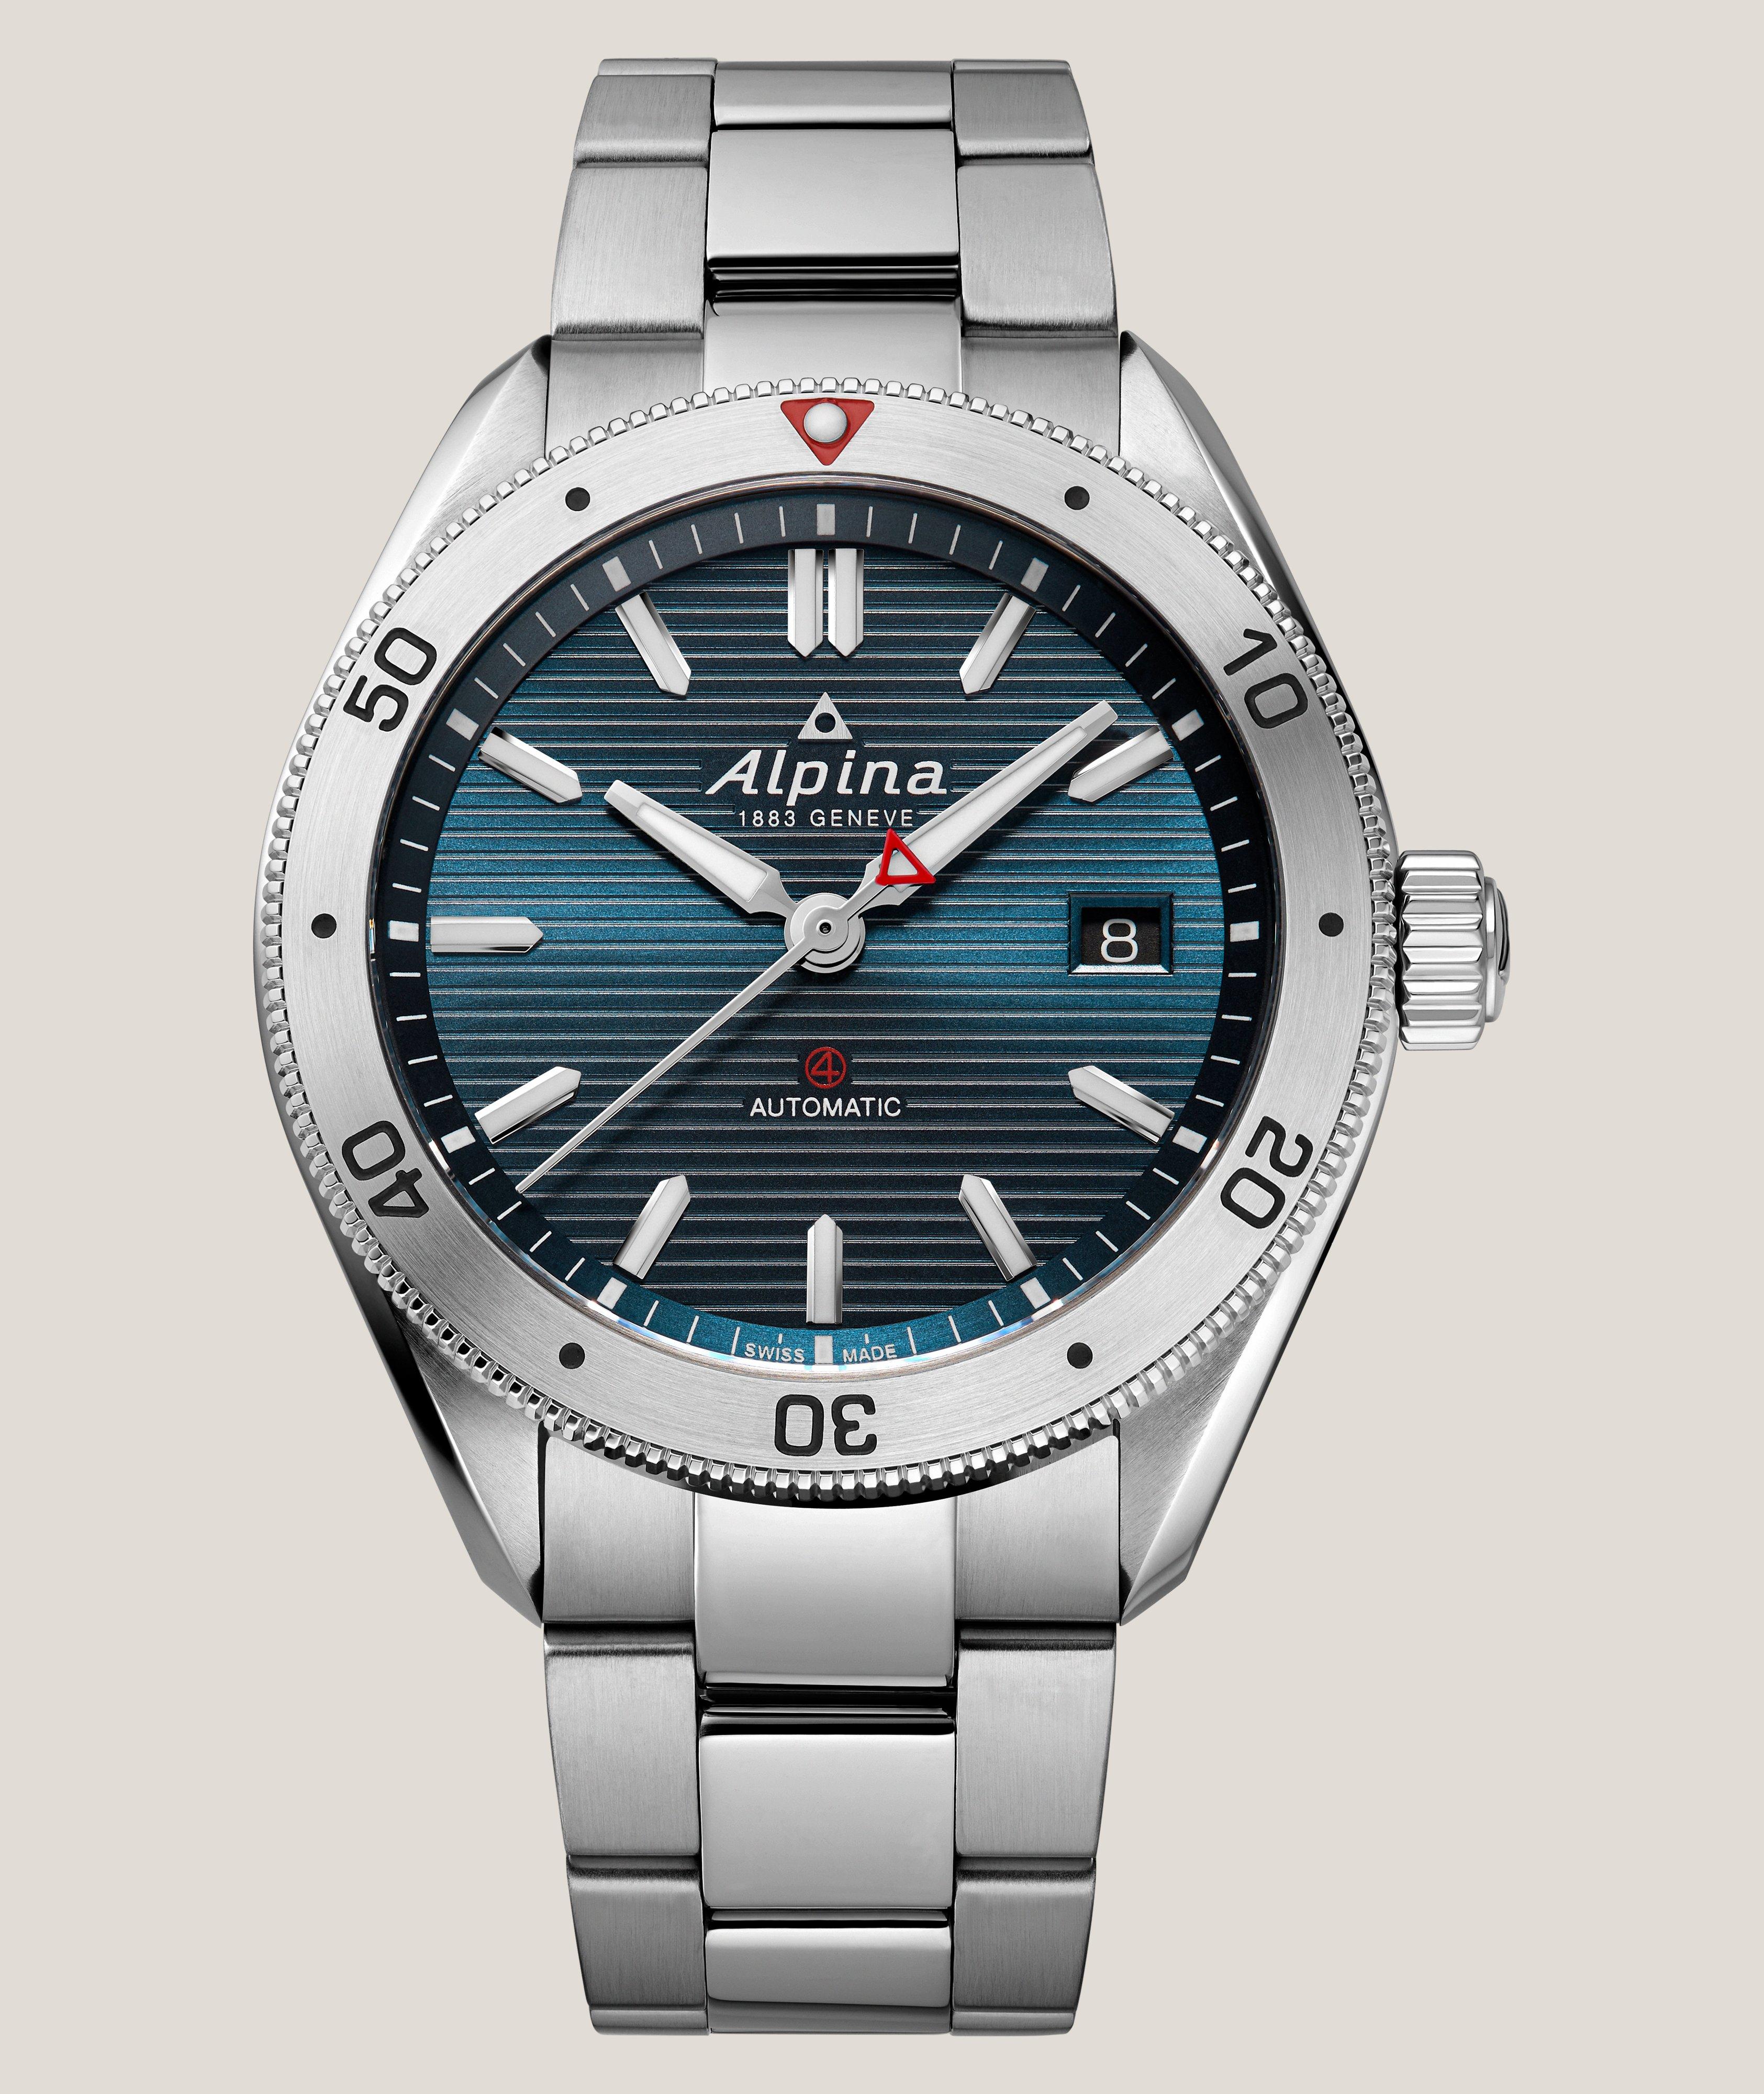 Alpiner 4 Automatic Watch image 0